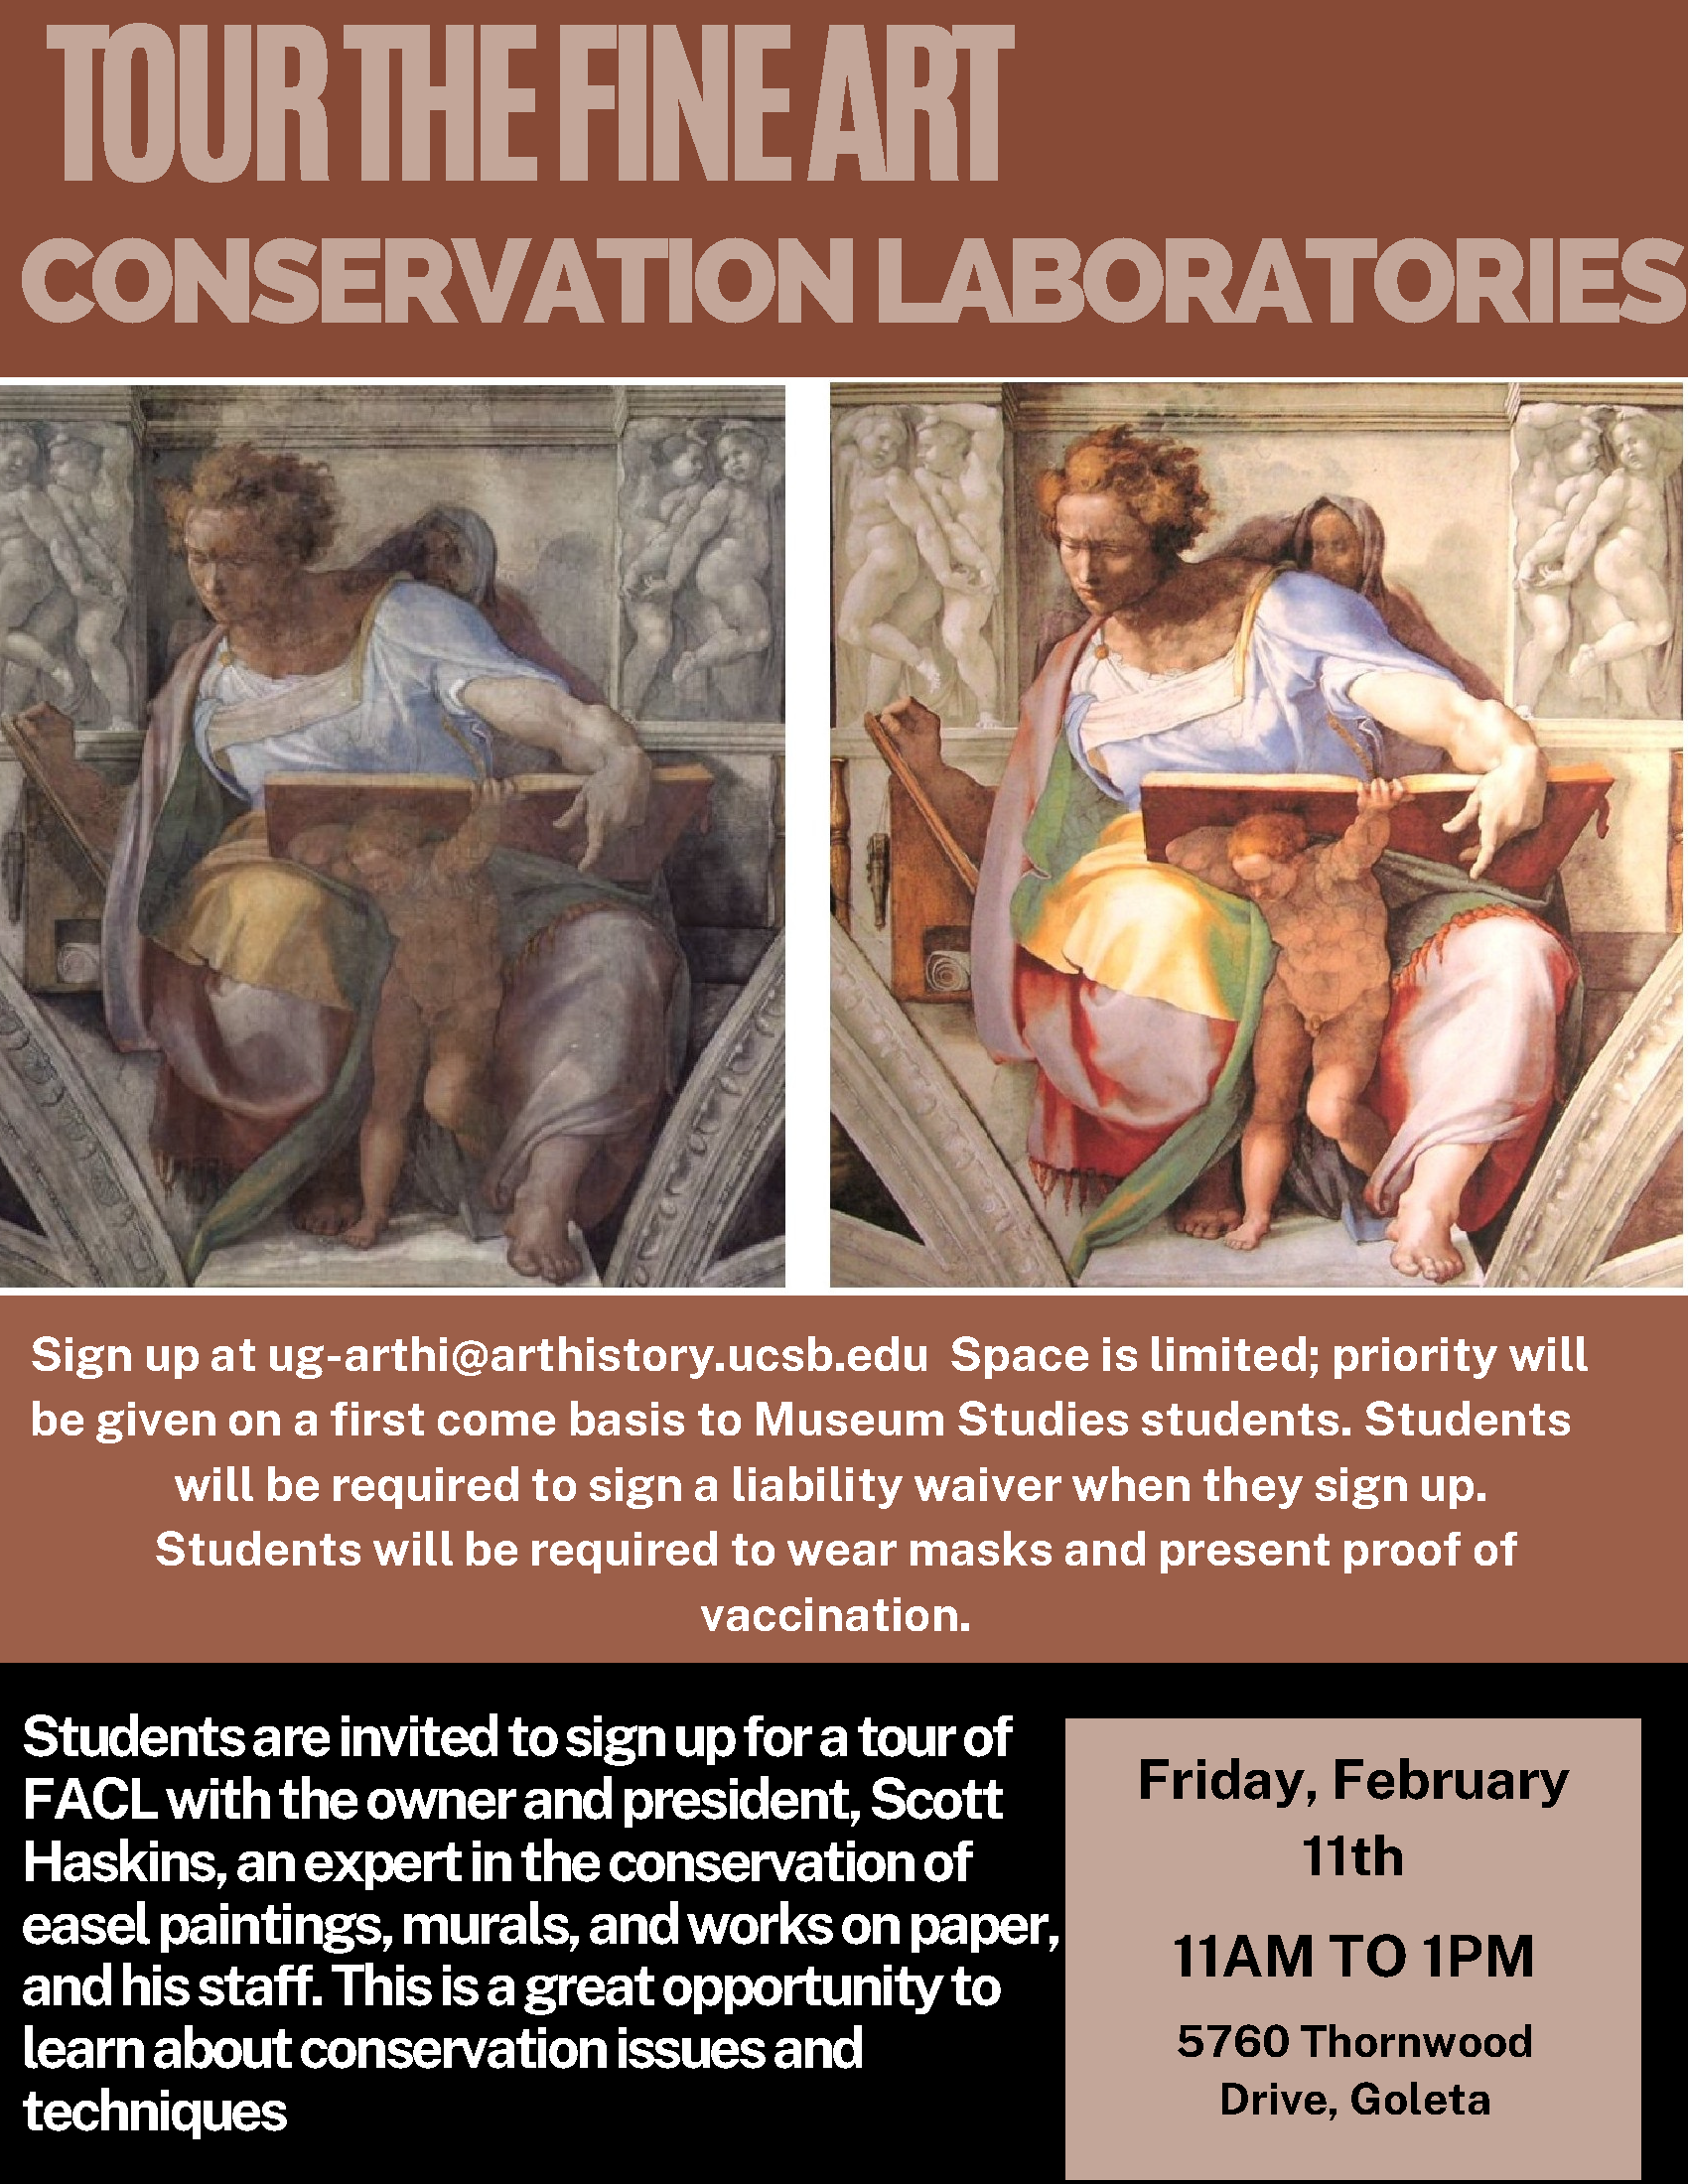 Fine Art Conservation Laboratories Tour: Students are invited to sign up for a tour of FACL with the owner and president, Scott Haskins, an expert in the conservation of easel paintings, murals, and works on paper, and his staff. This is a great opportunity to learn about conservation issues and techniques. Sign up at ug-arthi@arthistory.ucsb.edu Space is limited; priority will be given on a first come basis to Museum Studies students. Students will be required to sign a liability waiver when they sign up. Students will be required to wear masks and present proof of vaccination.